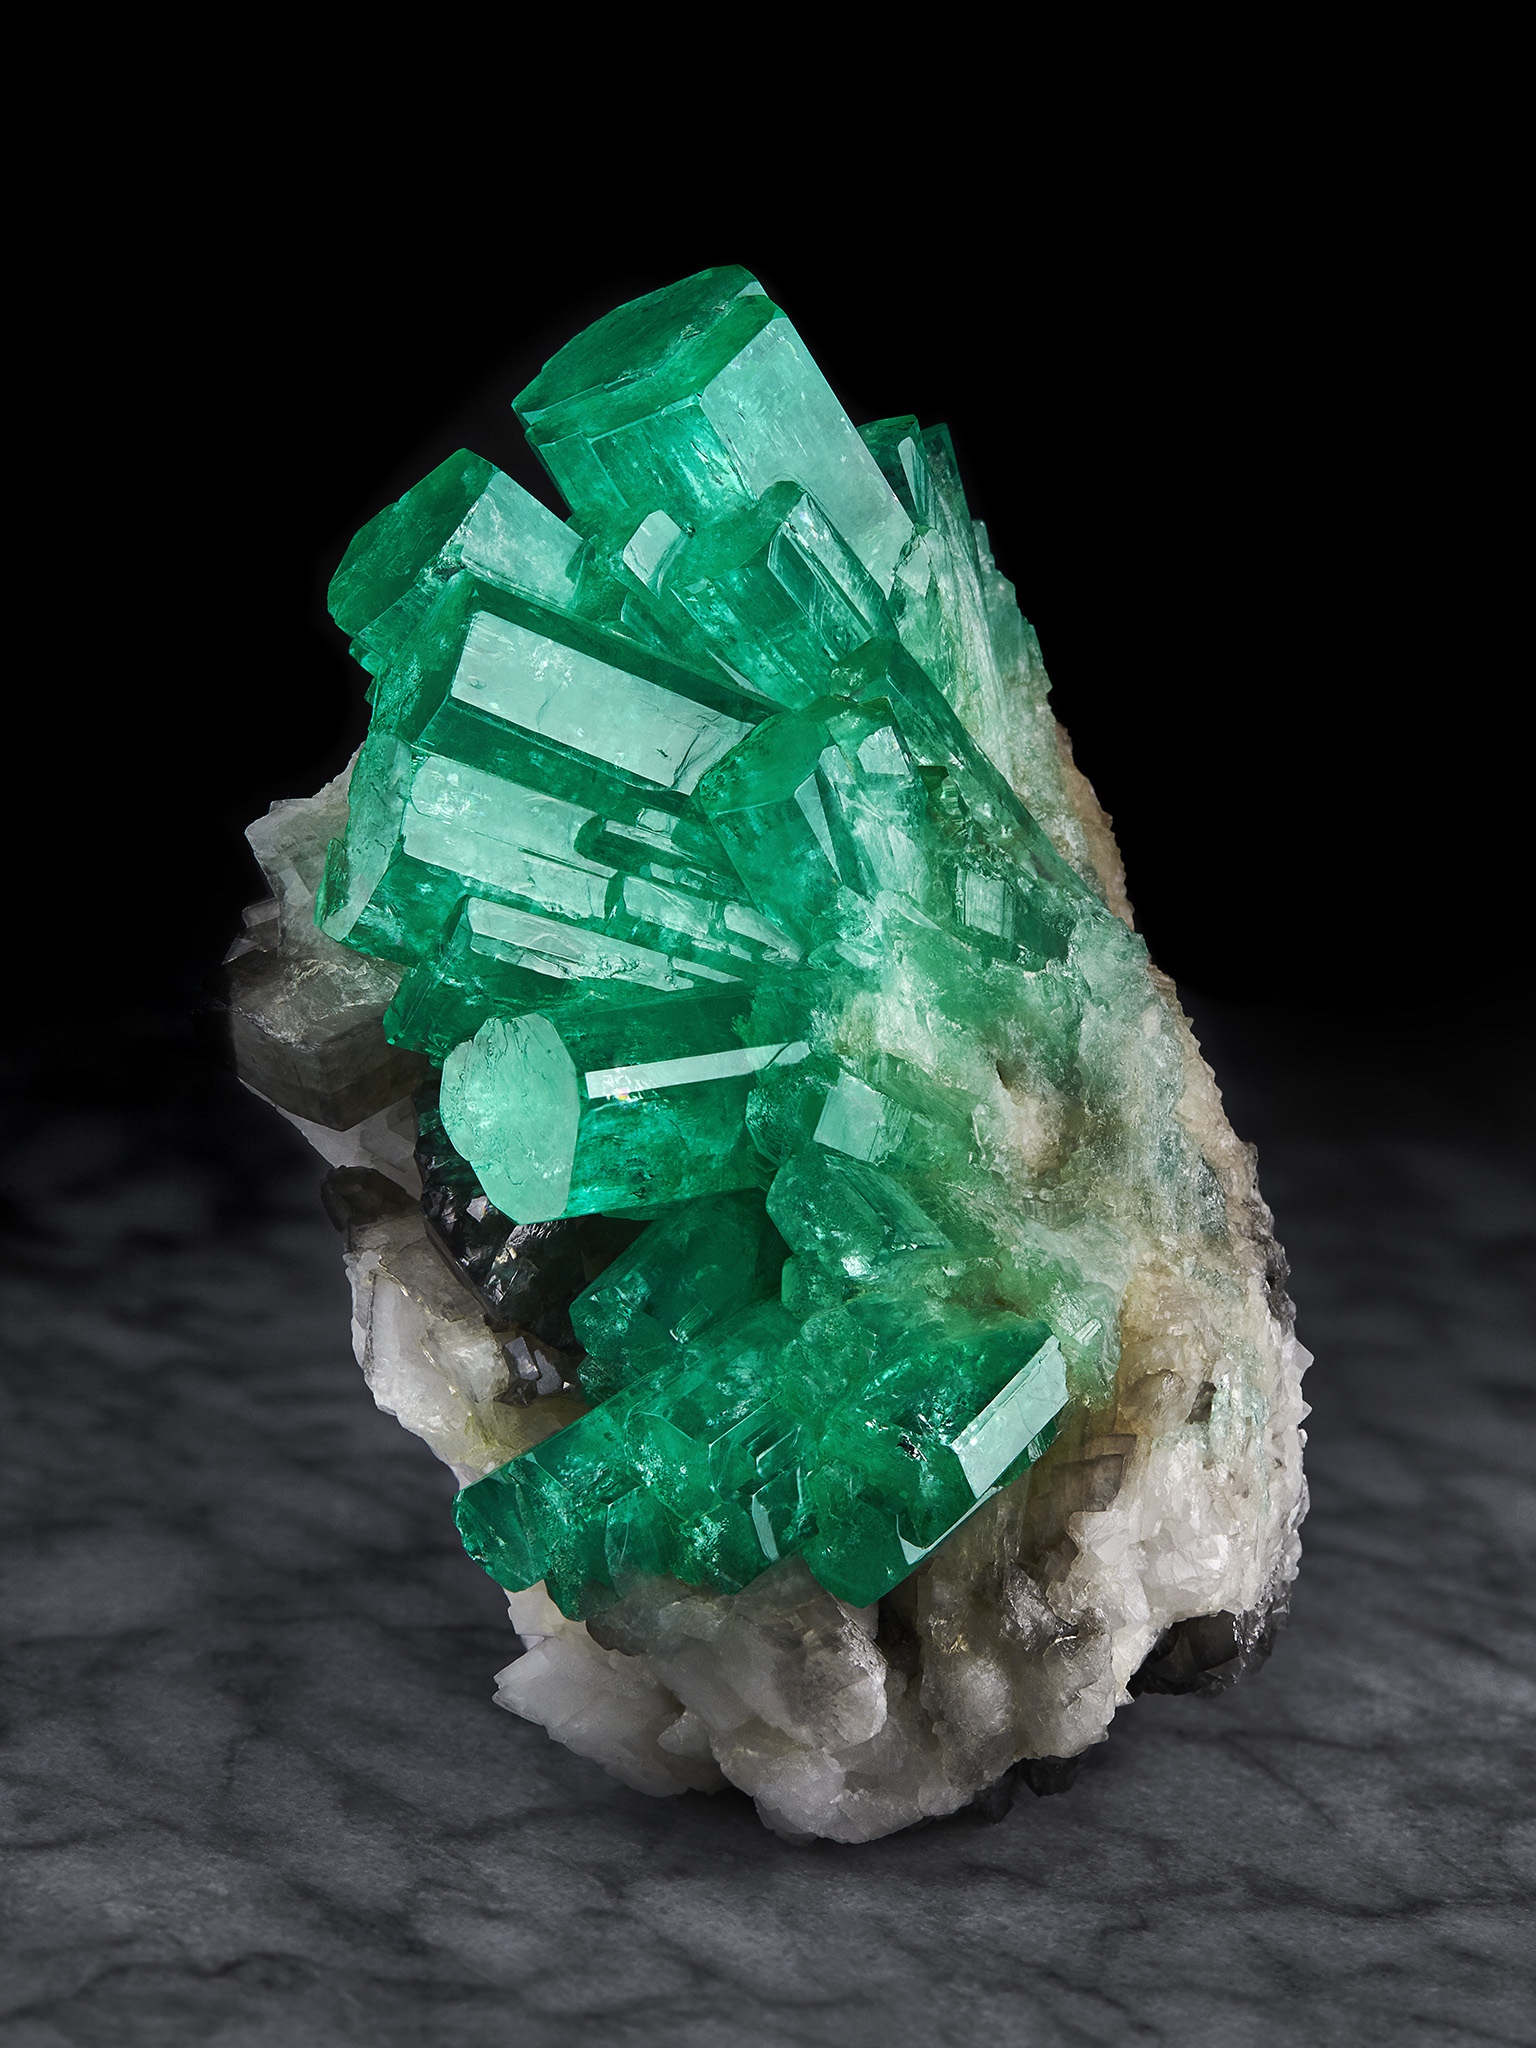 Emerald on Calcite, Coscuez Mine, Muzo Municipality. Rice Northwest Museum Collection. Image by Evan D'Arpino.